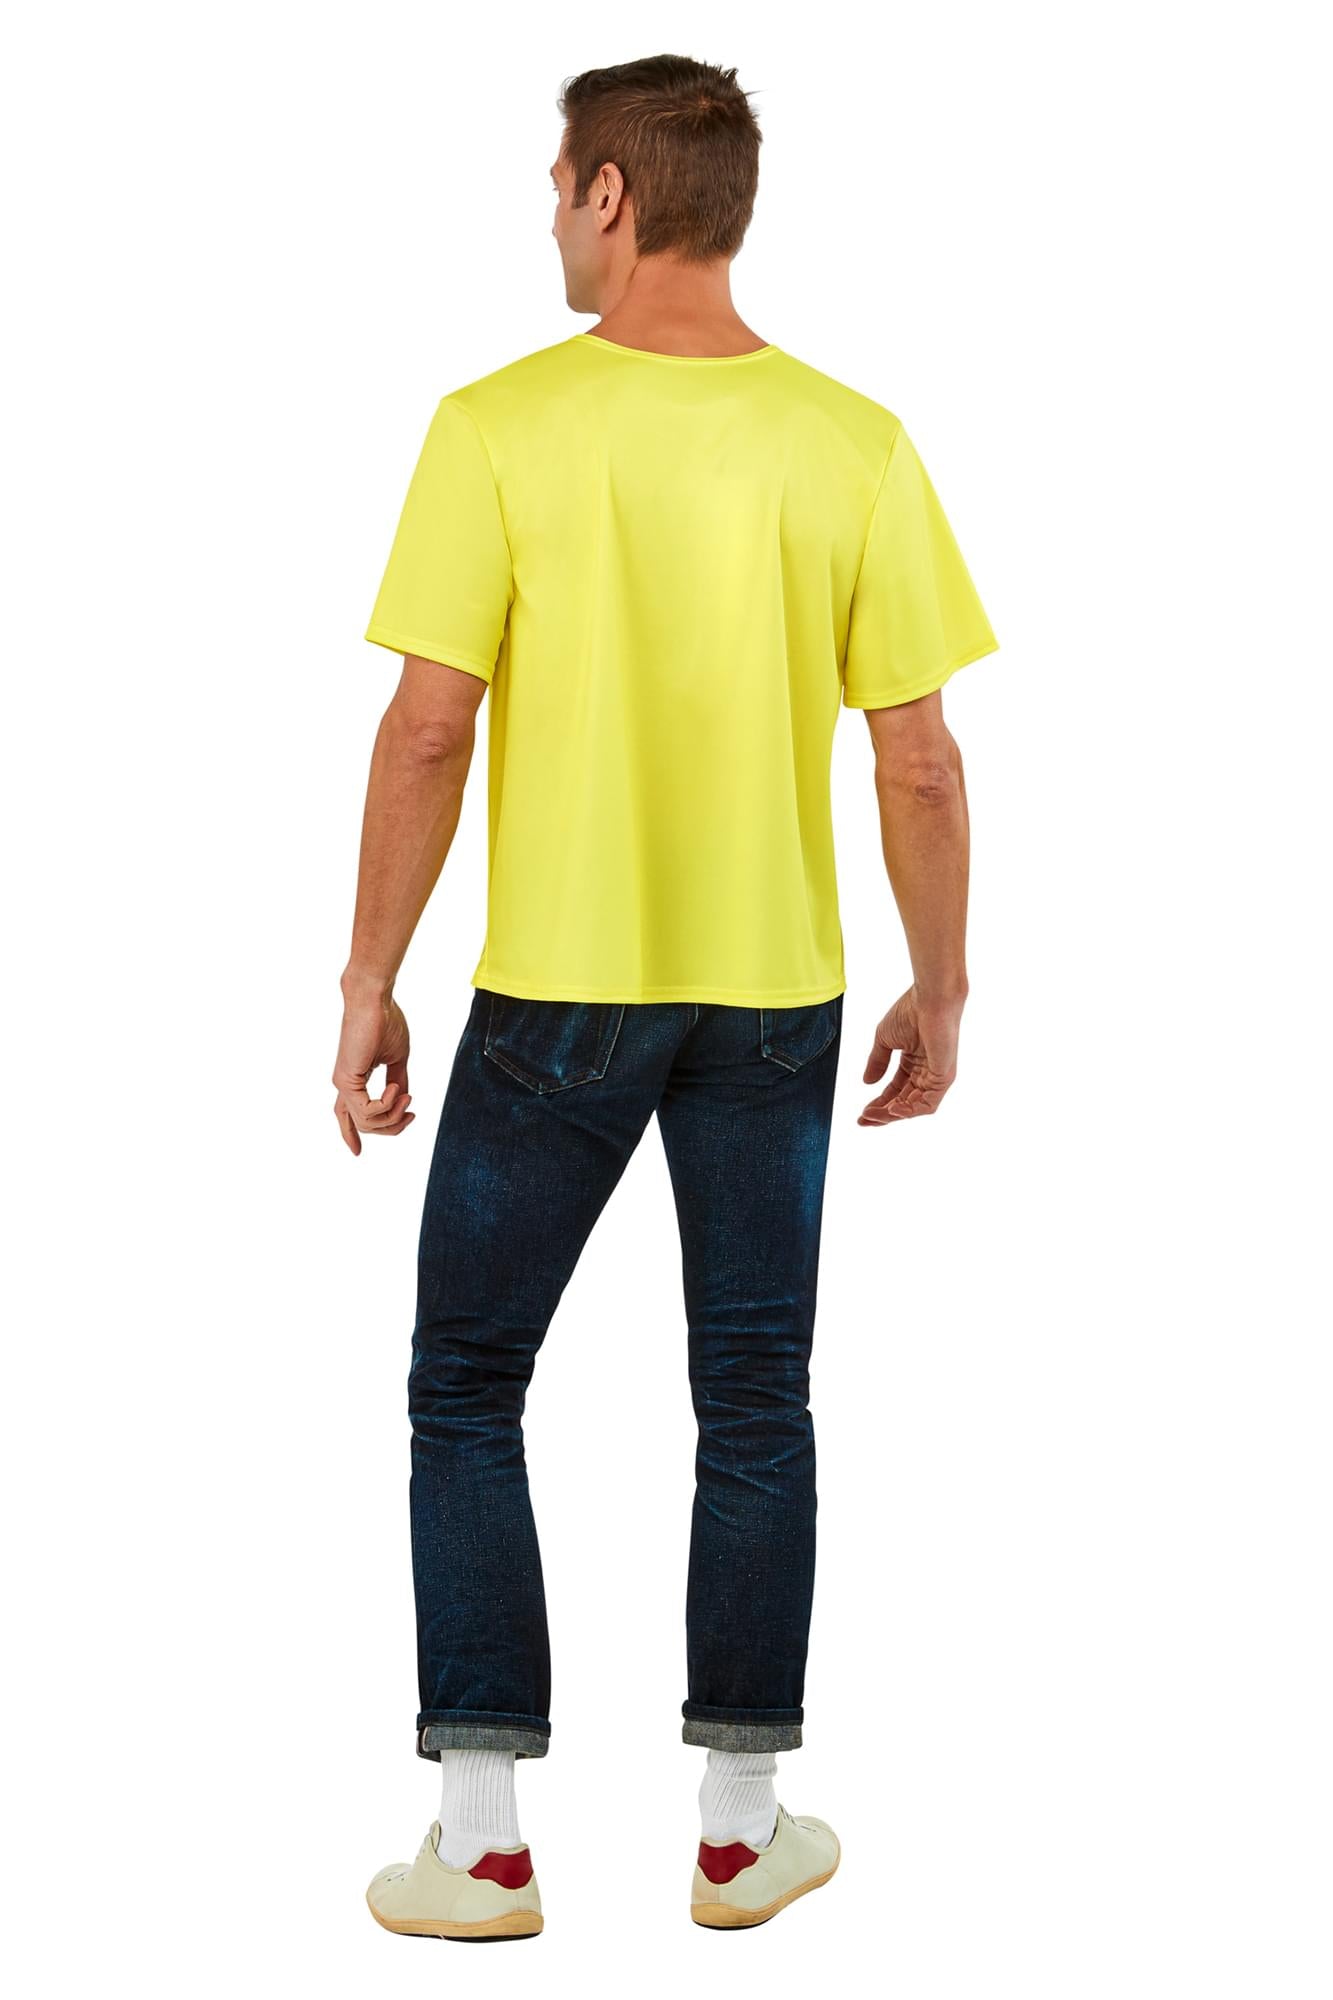 Rick and Morty Morty Men's Costume